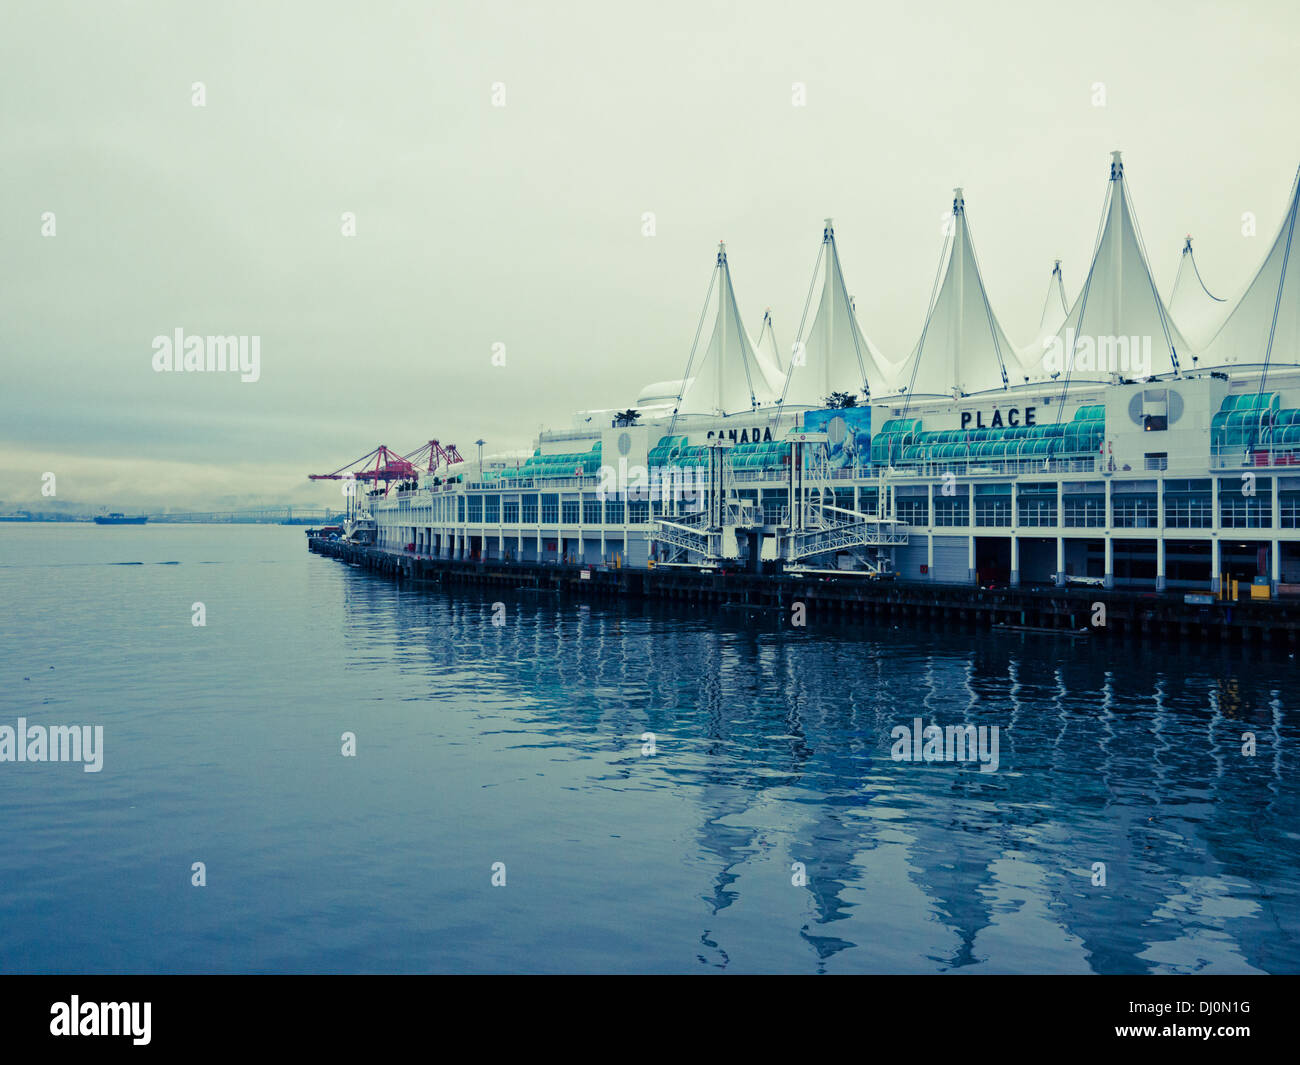 A view of a Canada Place on an overcast, moody day in Vancouver, British Columbia, Canada. Stock Photo